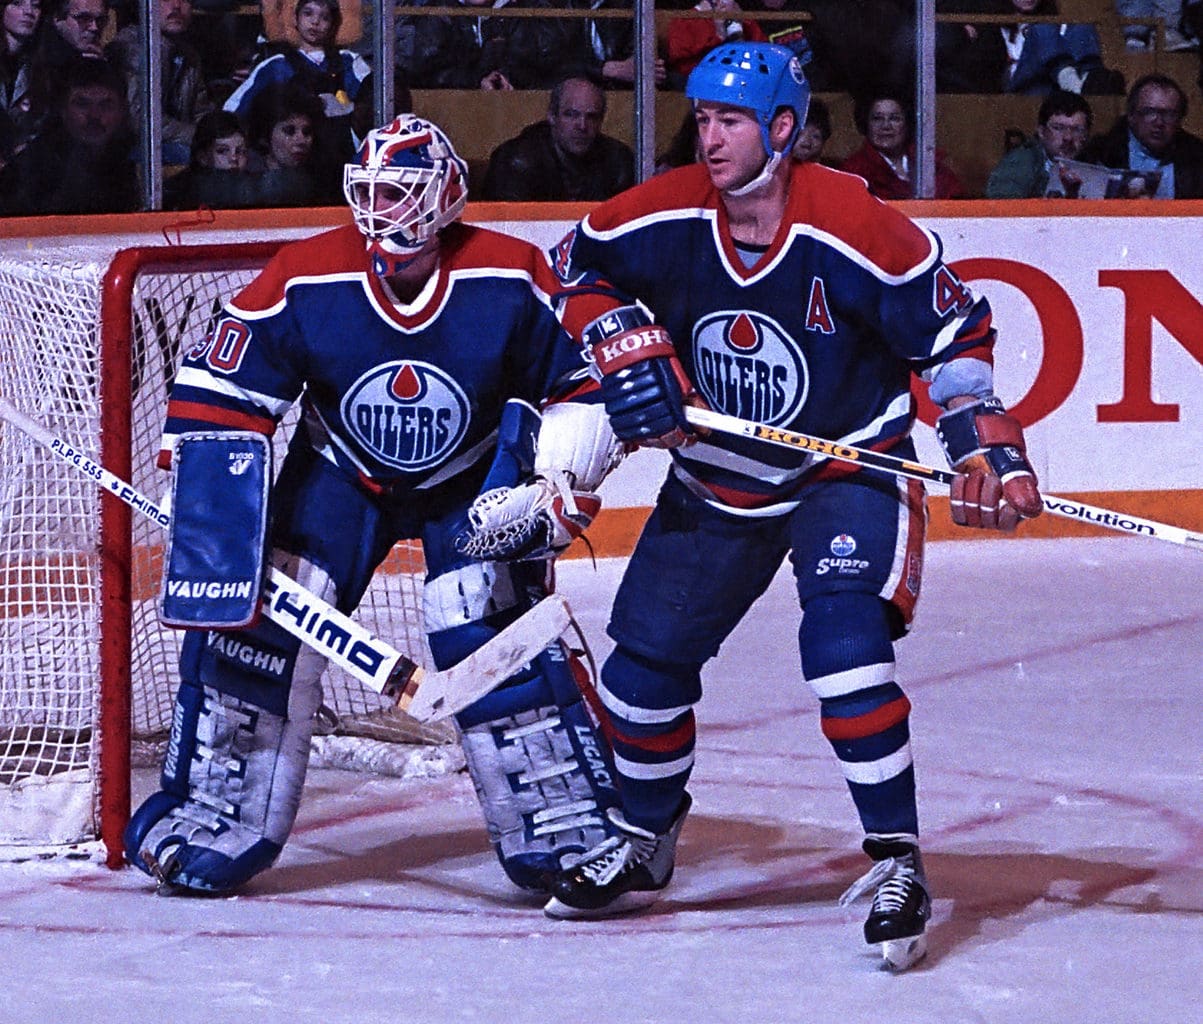 Meet the legend, Grant Fuhr 31, Edmonton Oilers most famous goaltender with  5 Stanley Cup Championships at Moneyline tomorrow at 5 p.m. before #VGK  take, By Moneyline LV